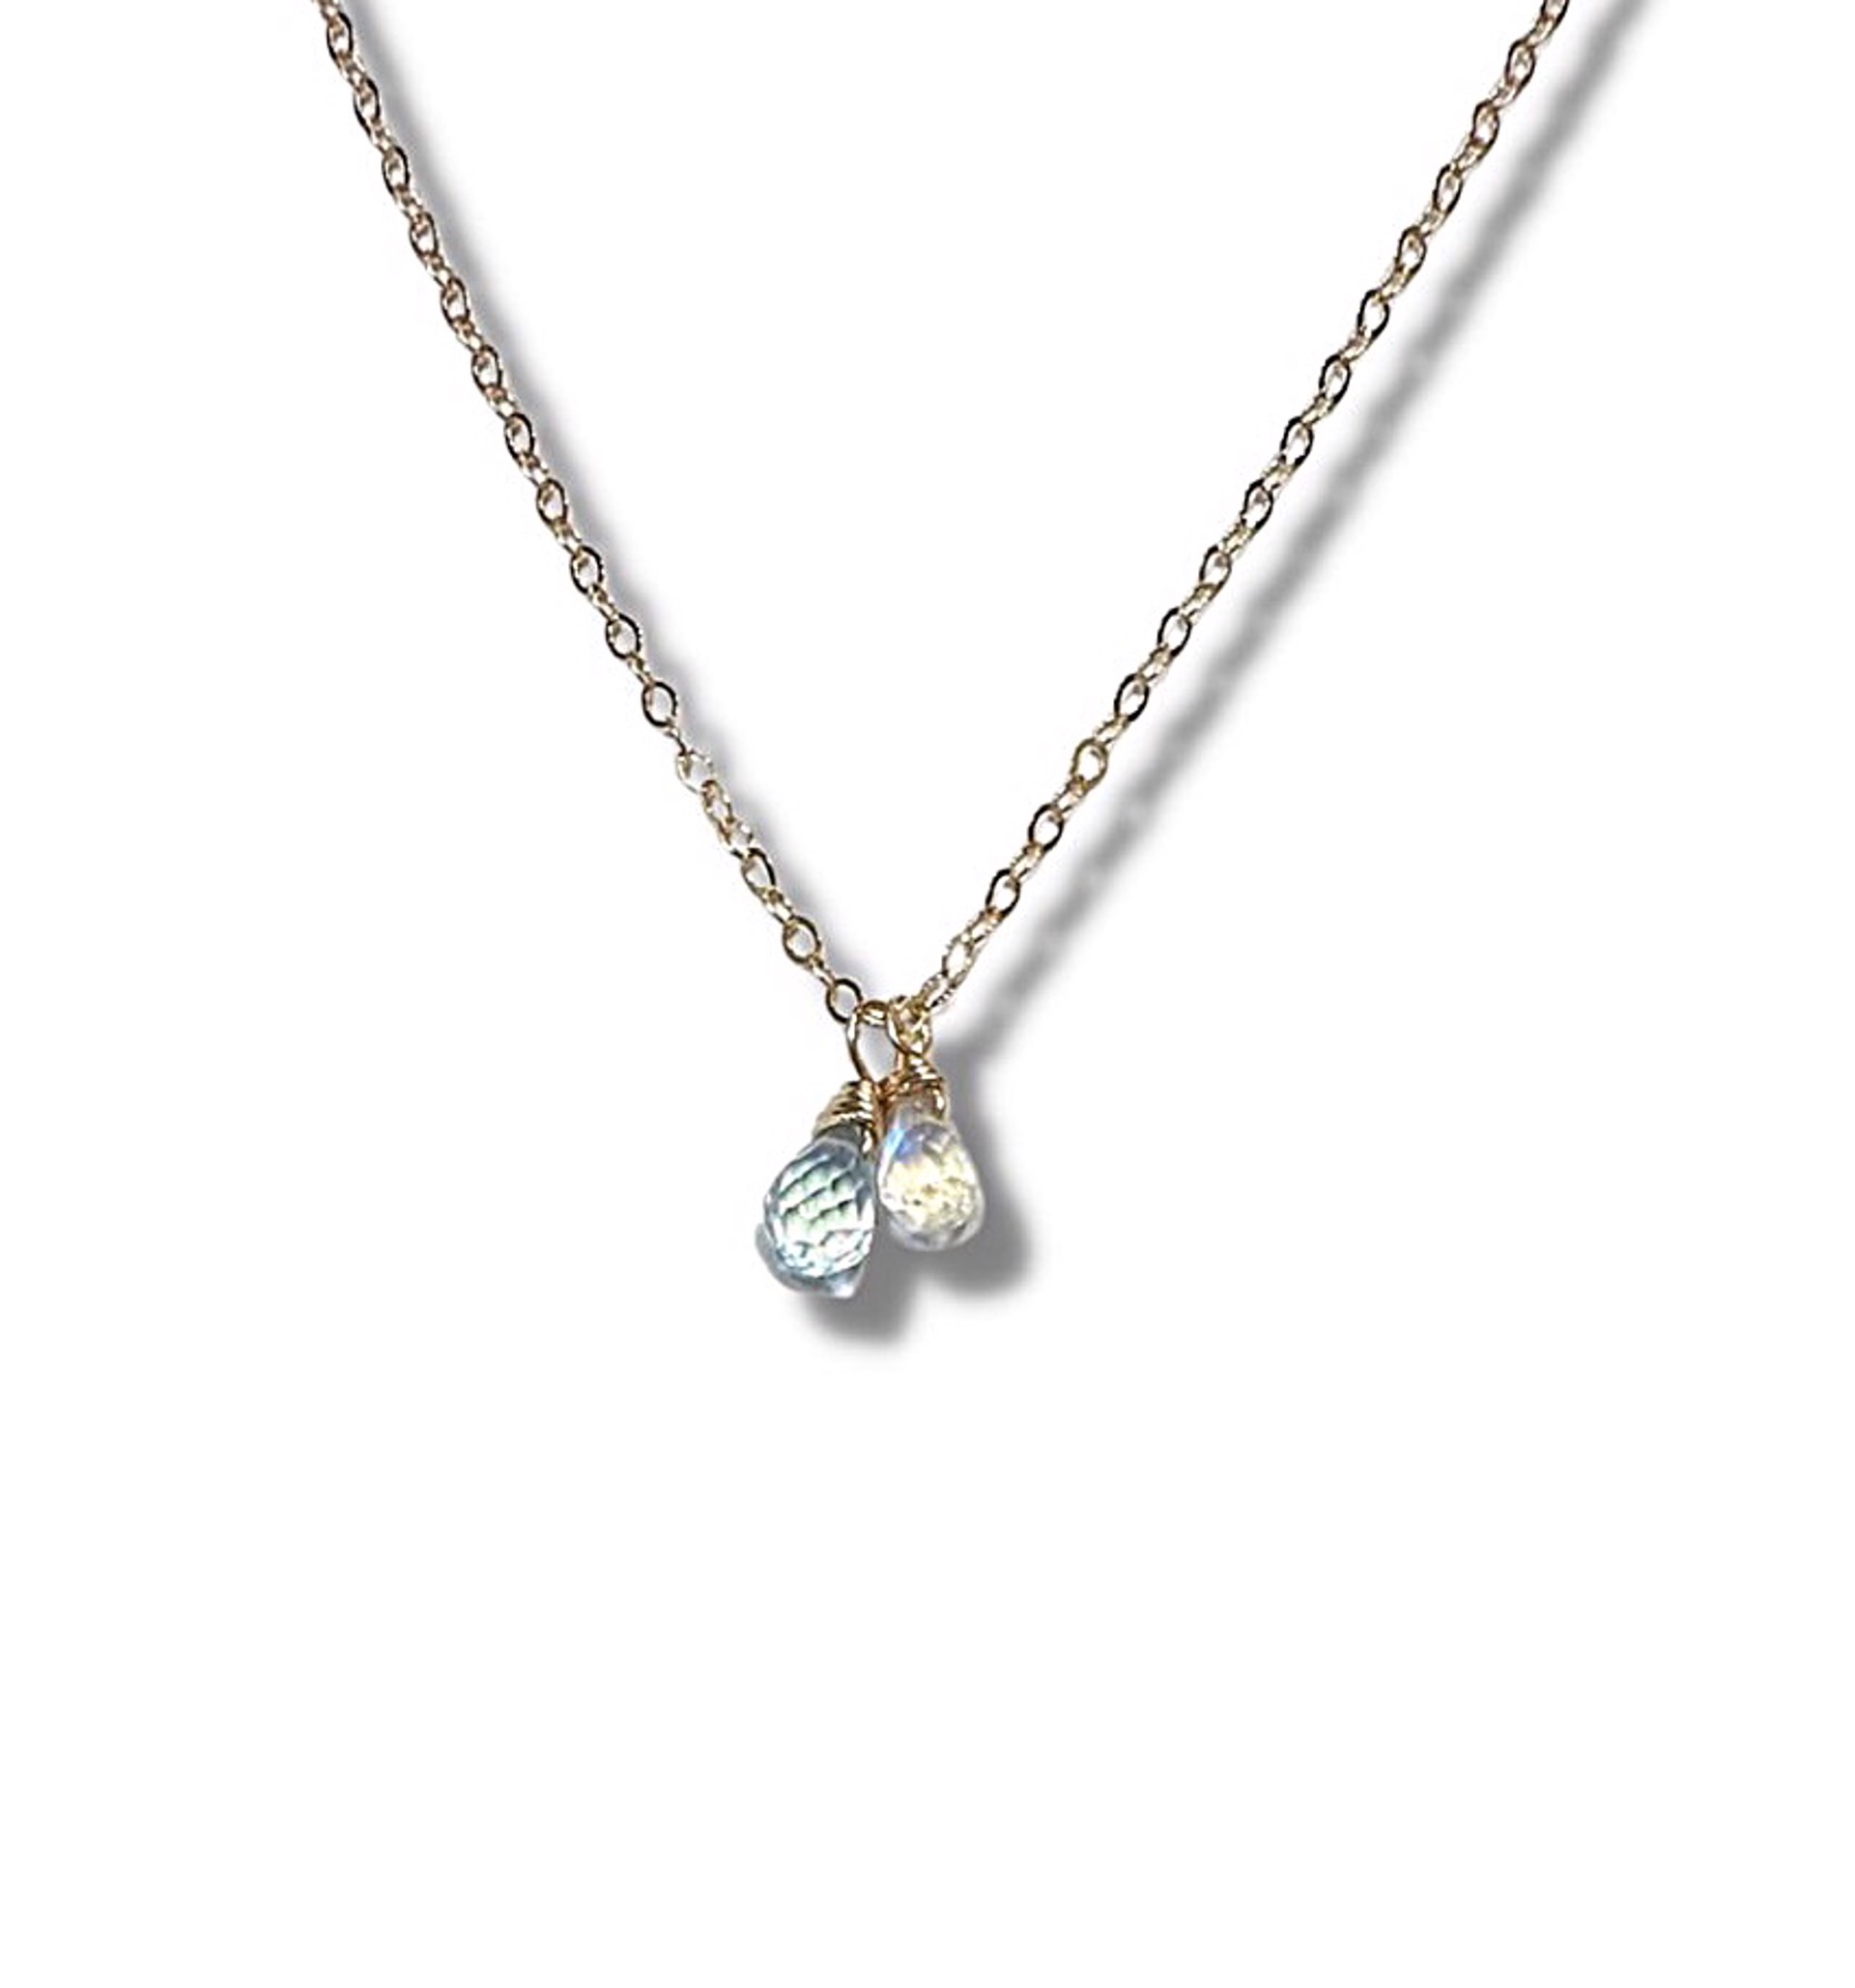 Necklace - 14K Gold Filled Aquamarine and Moonstone Drop by Julia Balestracci